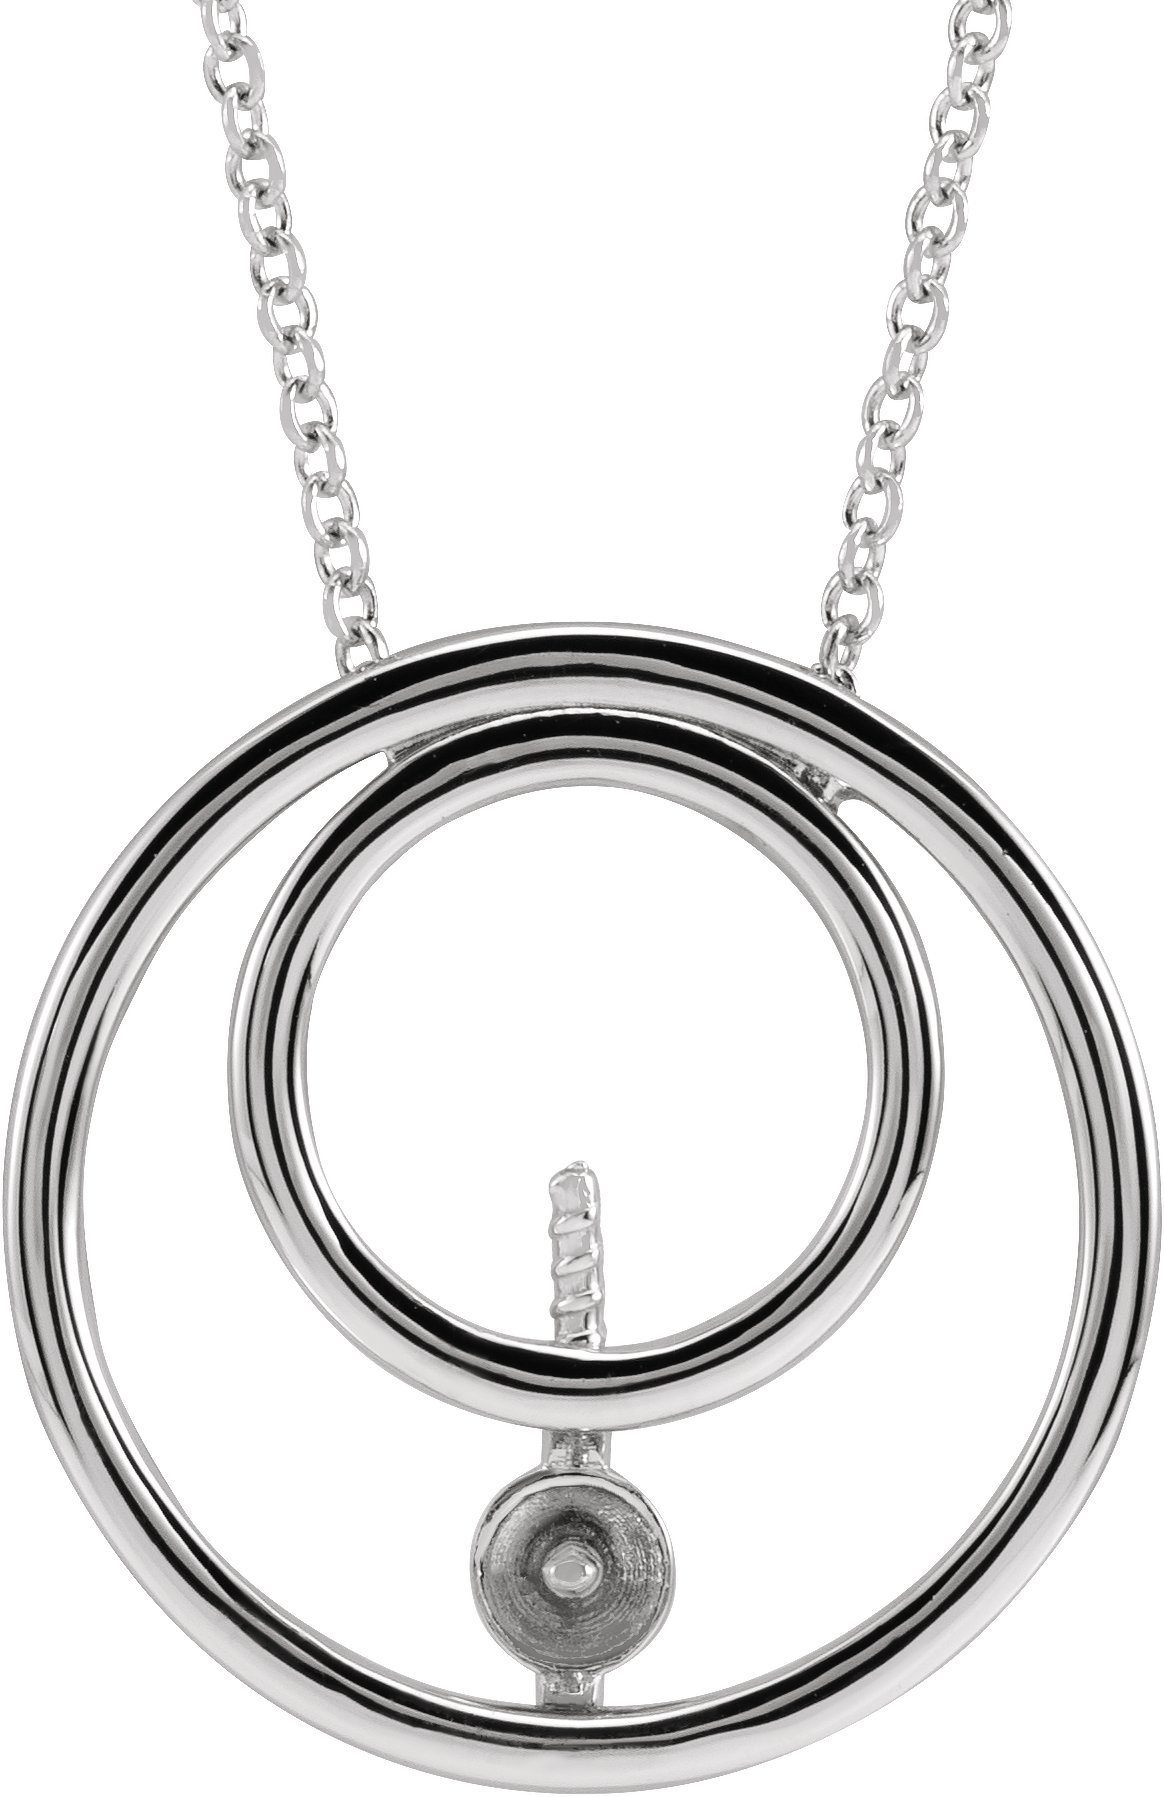 87103 / NECKLACE / Neosadený / Sterling Silver / 16-18 In / Polished / Family Necklace Mounting